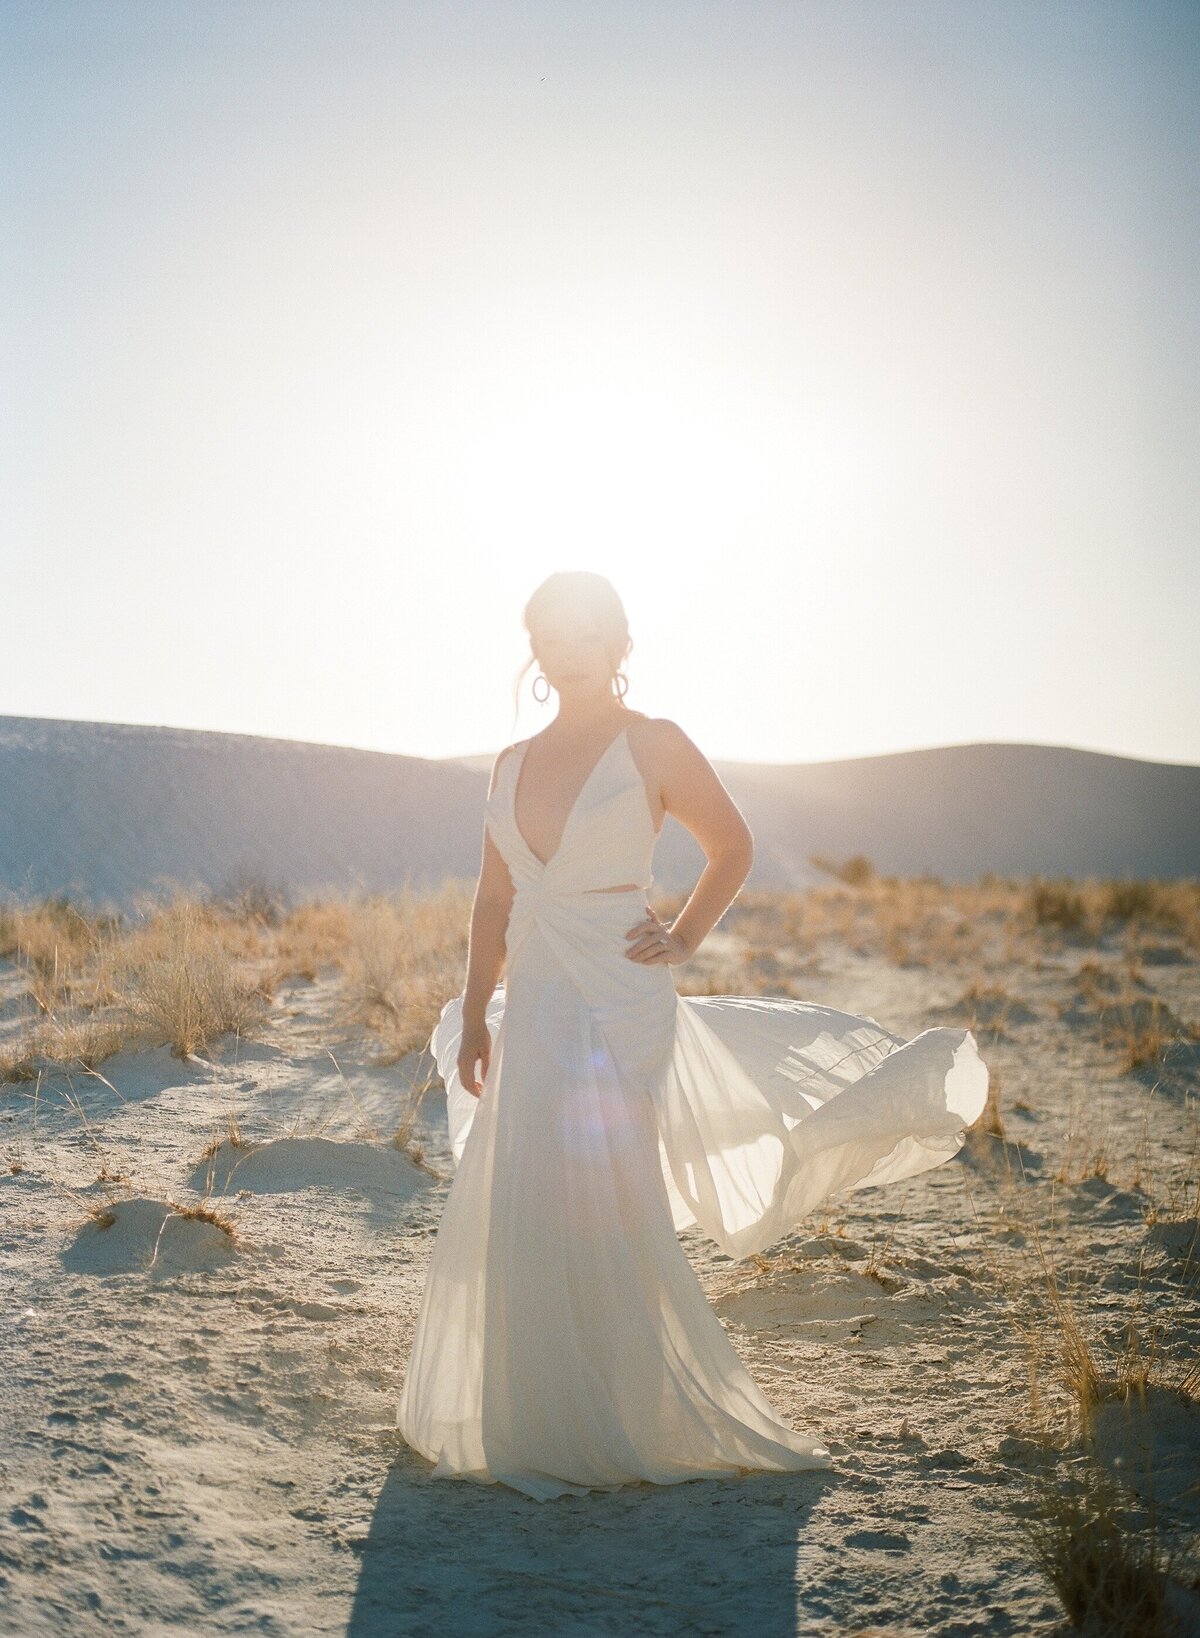 brides wedding dress blowing in white sands new mexico